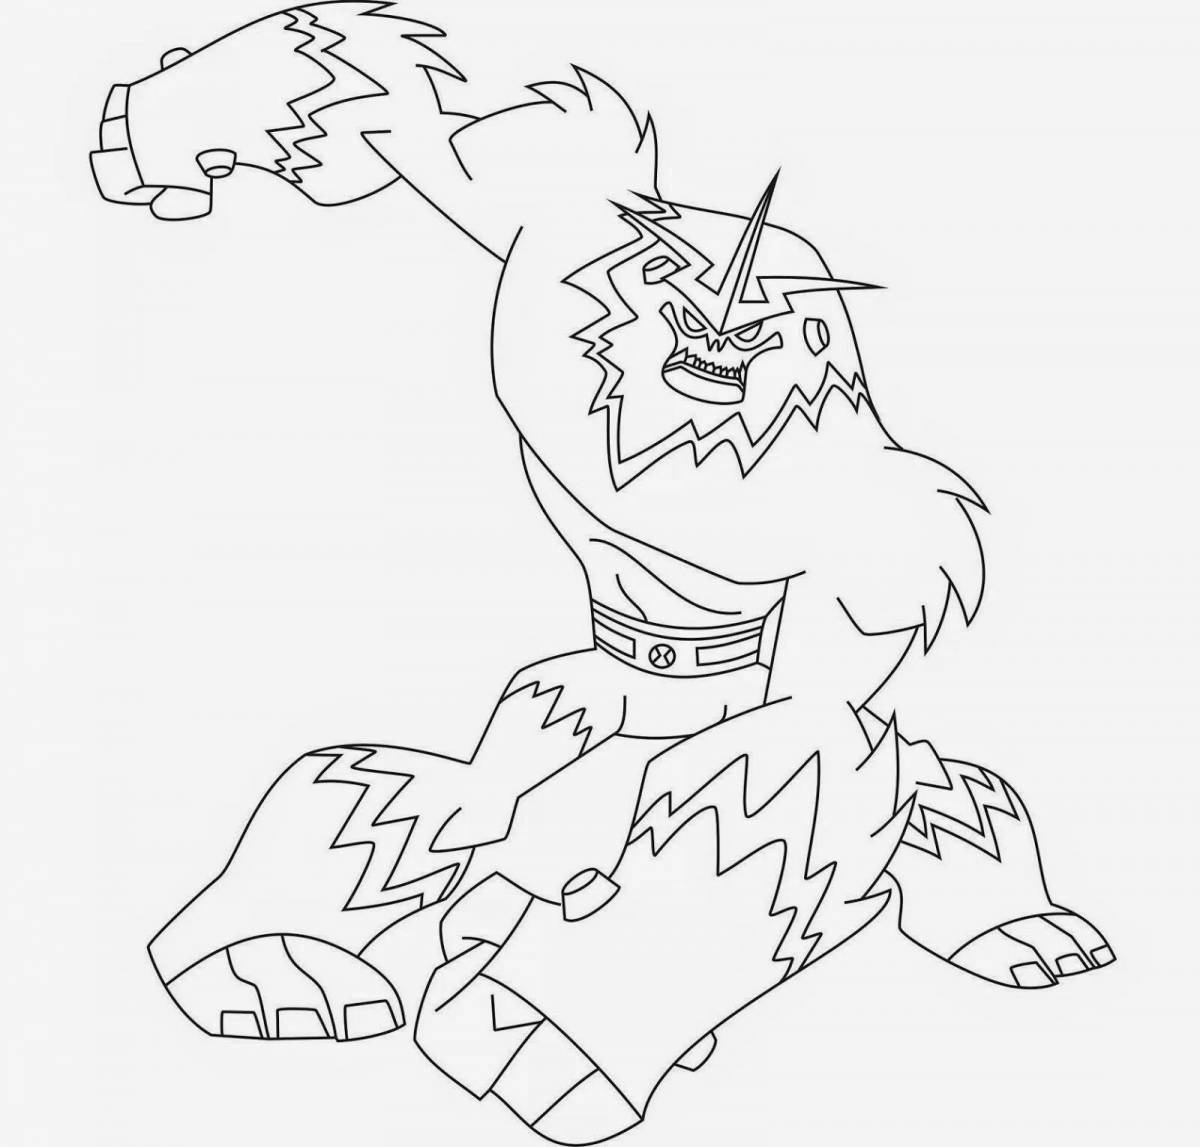 Awesome chickigan coloring page